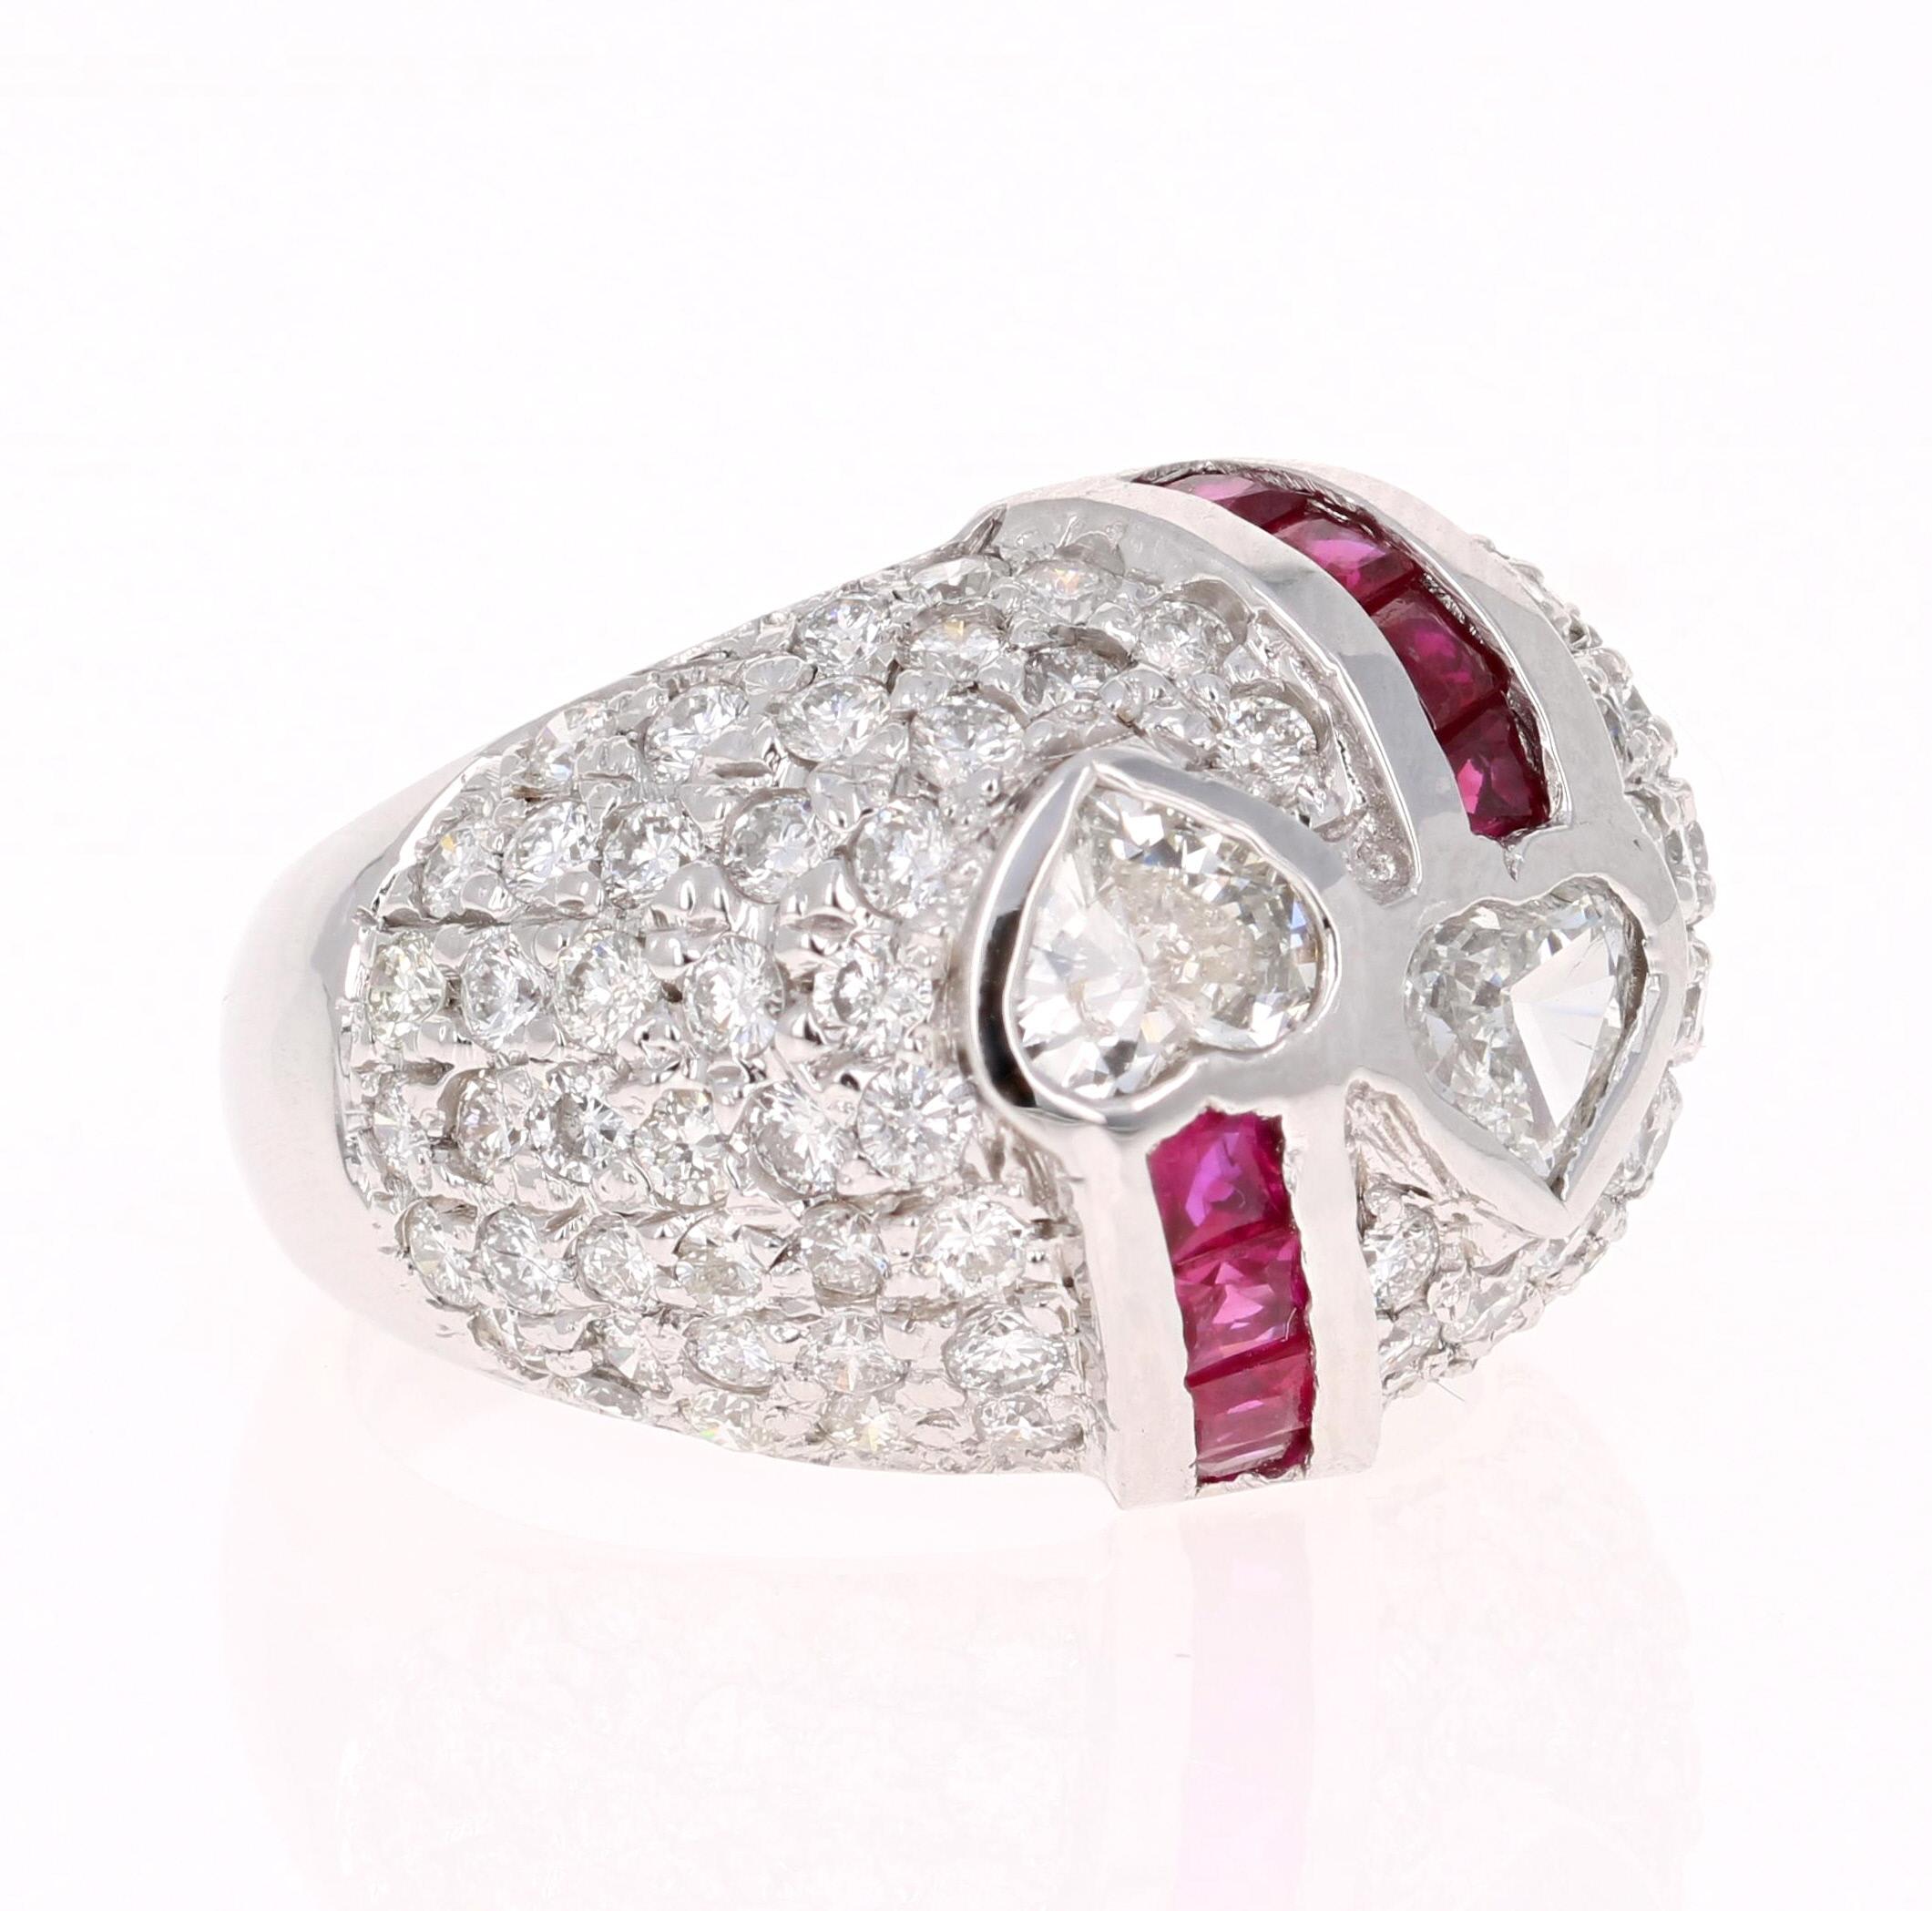 A gorgeous ring with Heart Cut Diamonds and Rubies!

The ring has 2 Heart Cut Diamonds that weigh 0.72 carats and 86 Round Cut Diamonds that weigh 2.03 carats. The clarity and color of the diamonds are SI/F. There are 8 Rubies that weigh 0.66